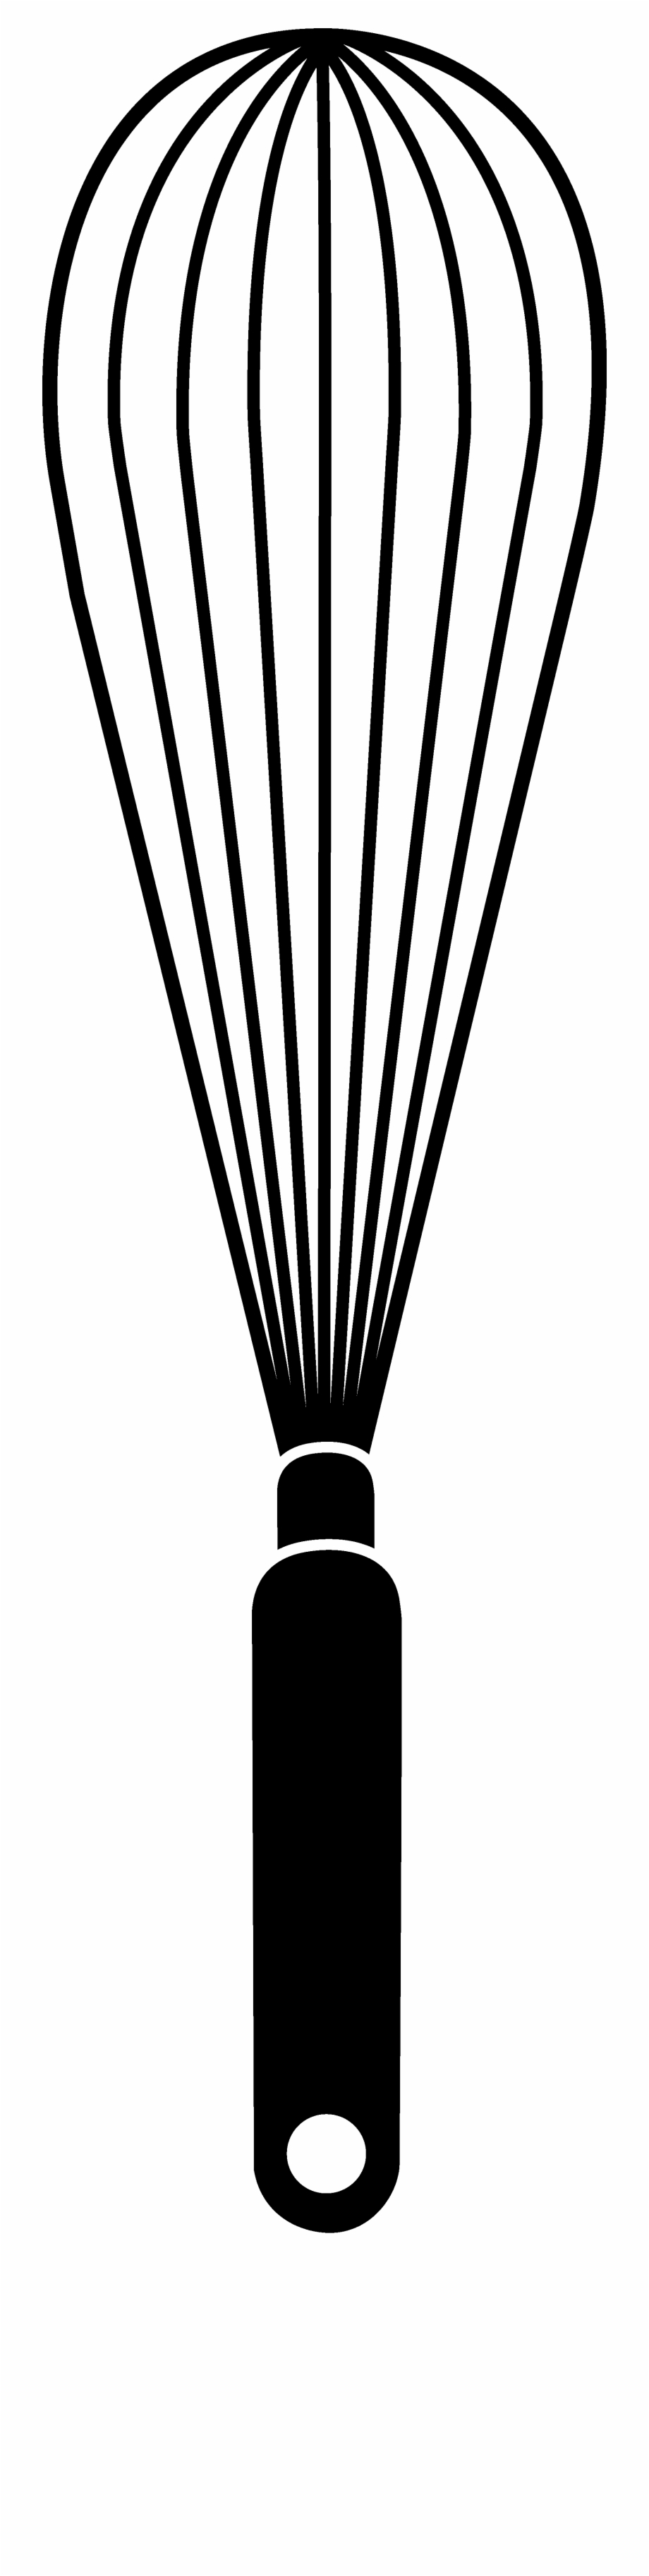 Cooking Whisk Clip Art